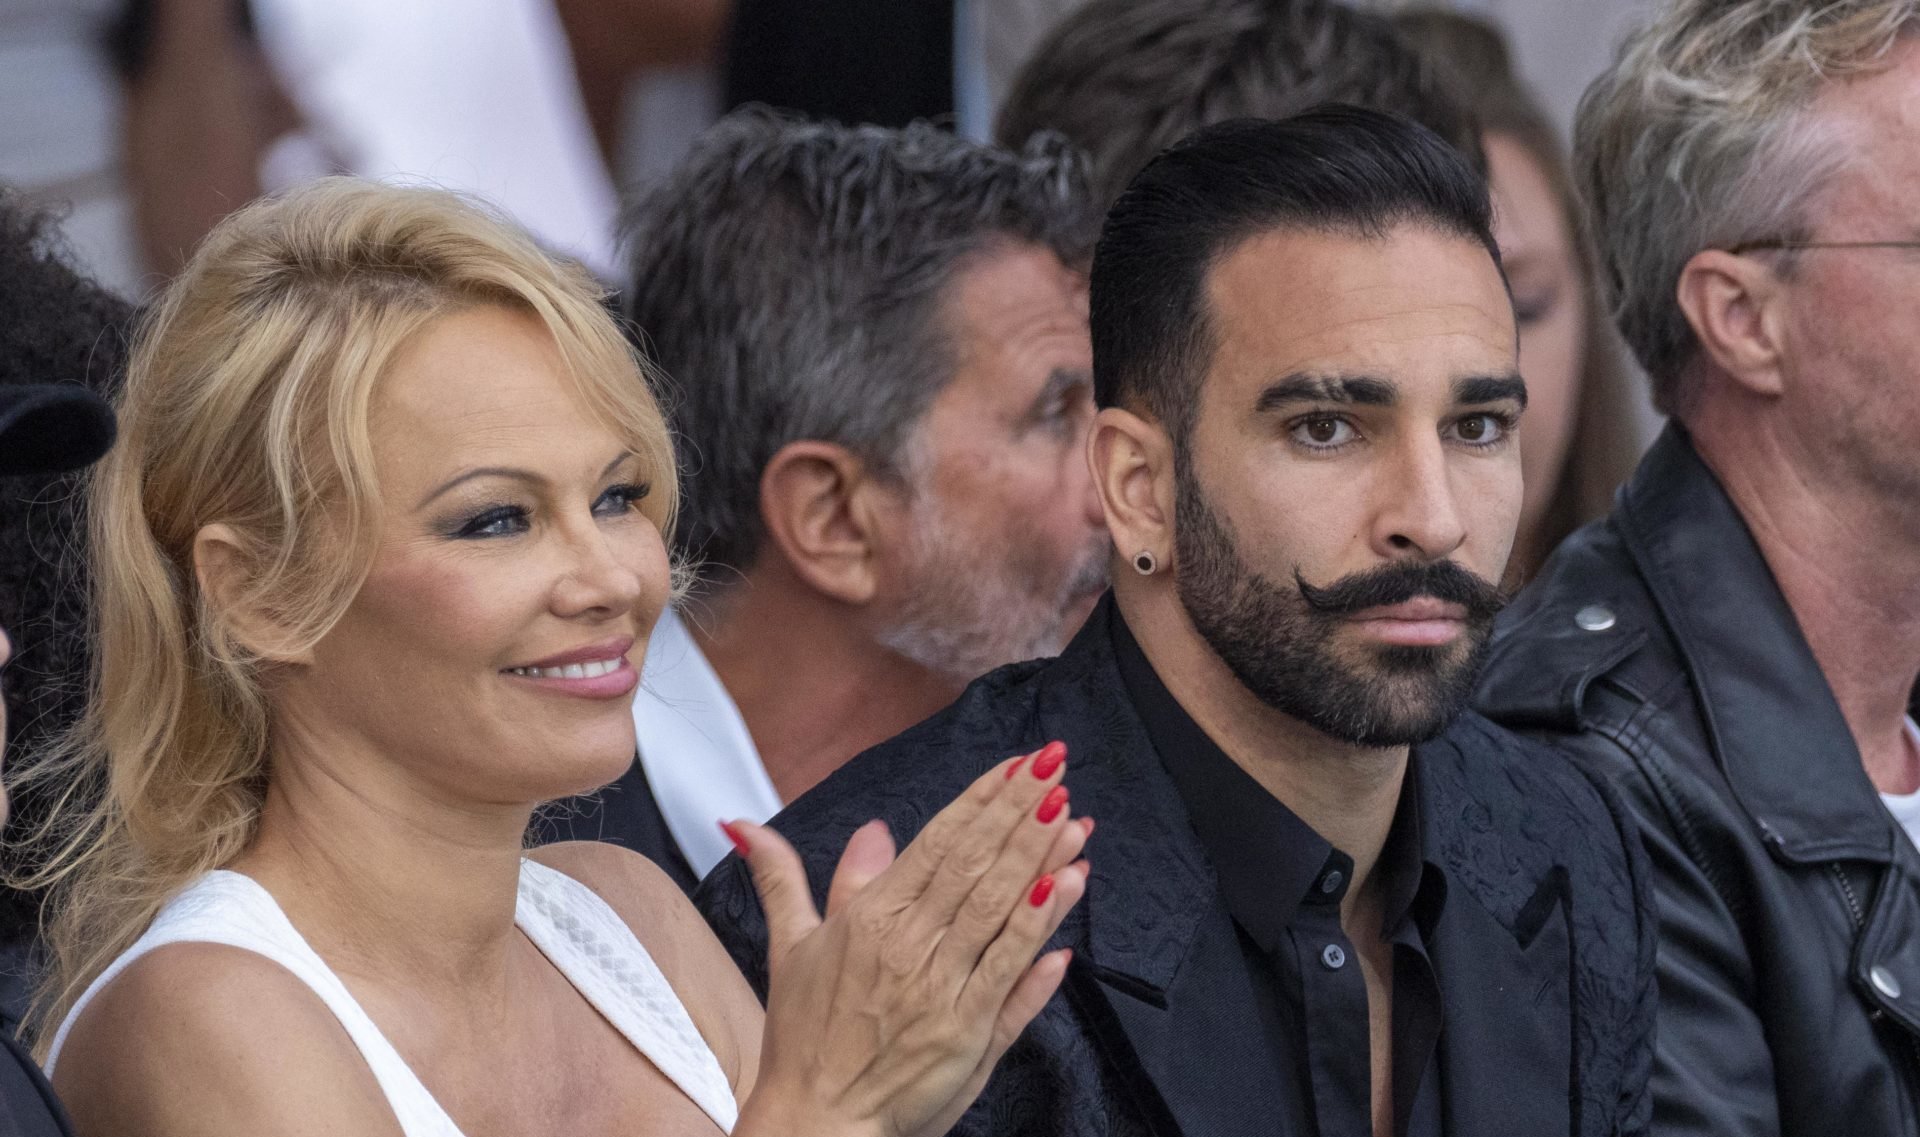 Which French soccer player did Baywatch star Pamela Anderson date?